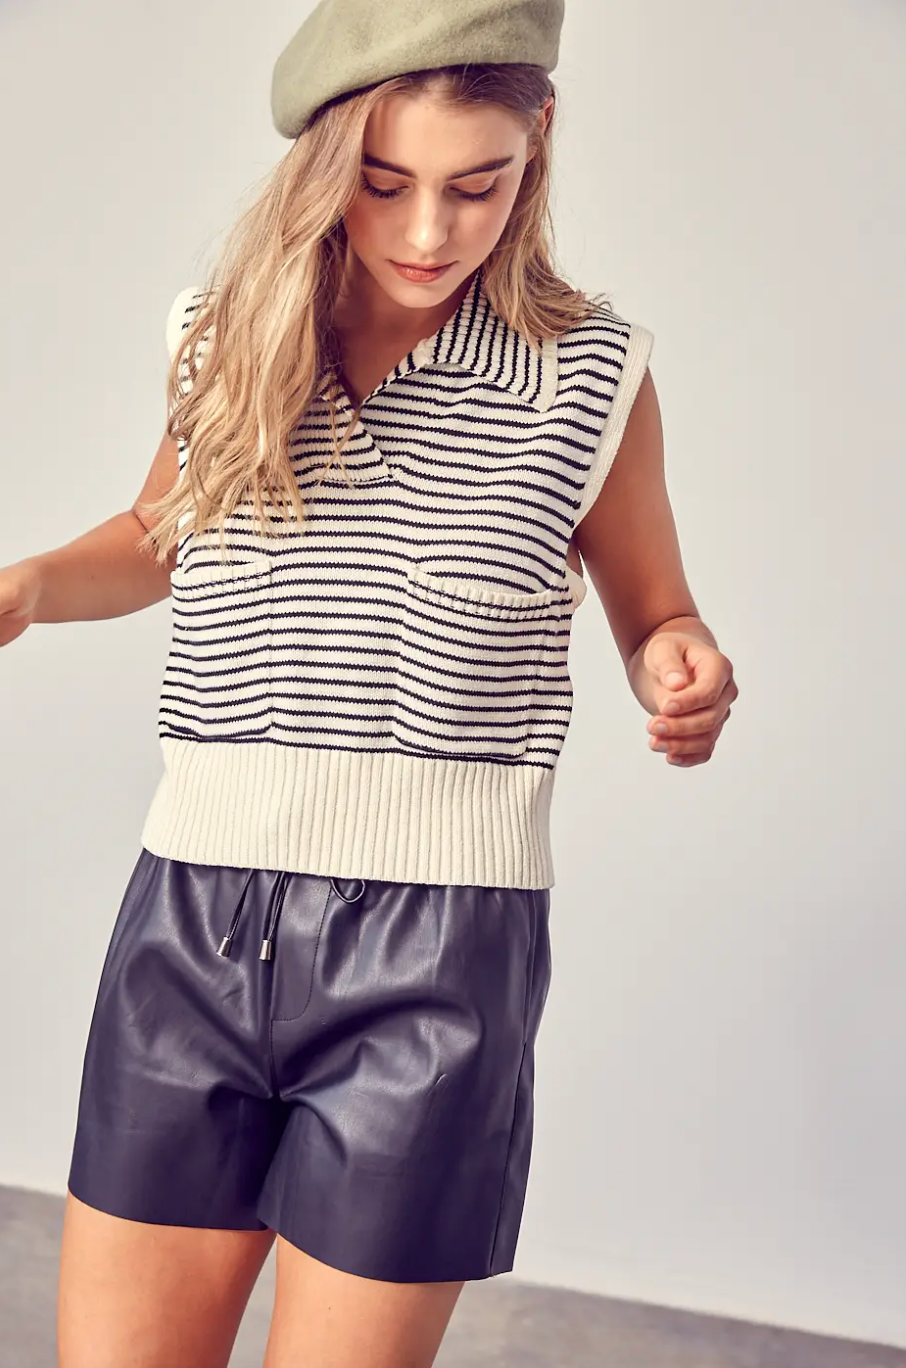 Stripped Sweater Vest by Urban Luxe Lifestyles